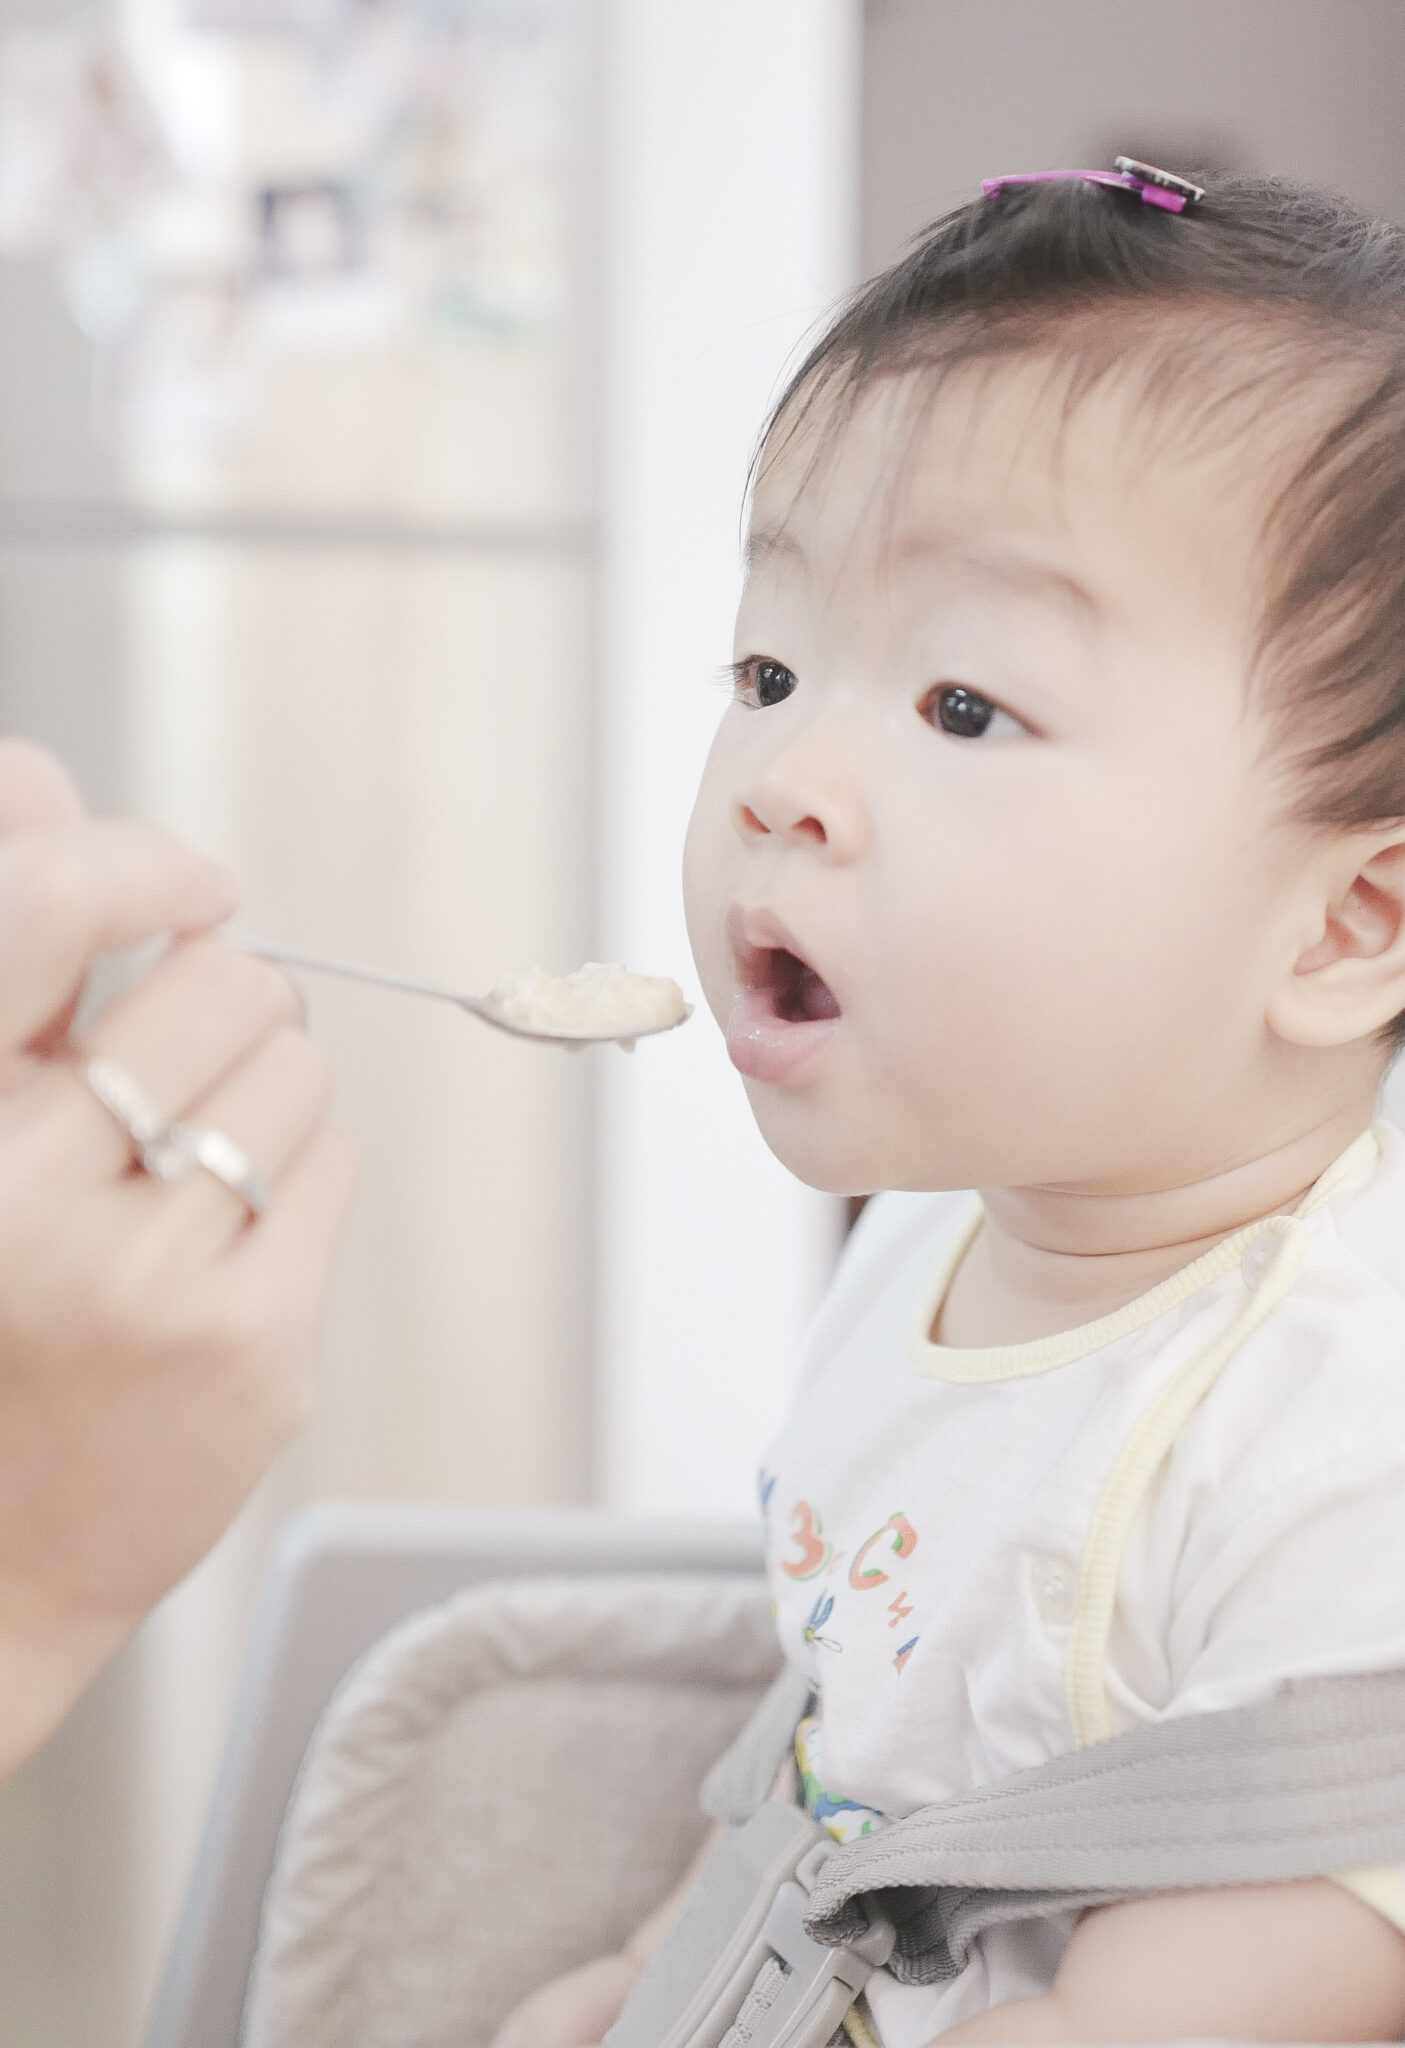 Solid Foods to Avoid Feeding Your Baby Within the First Year